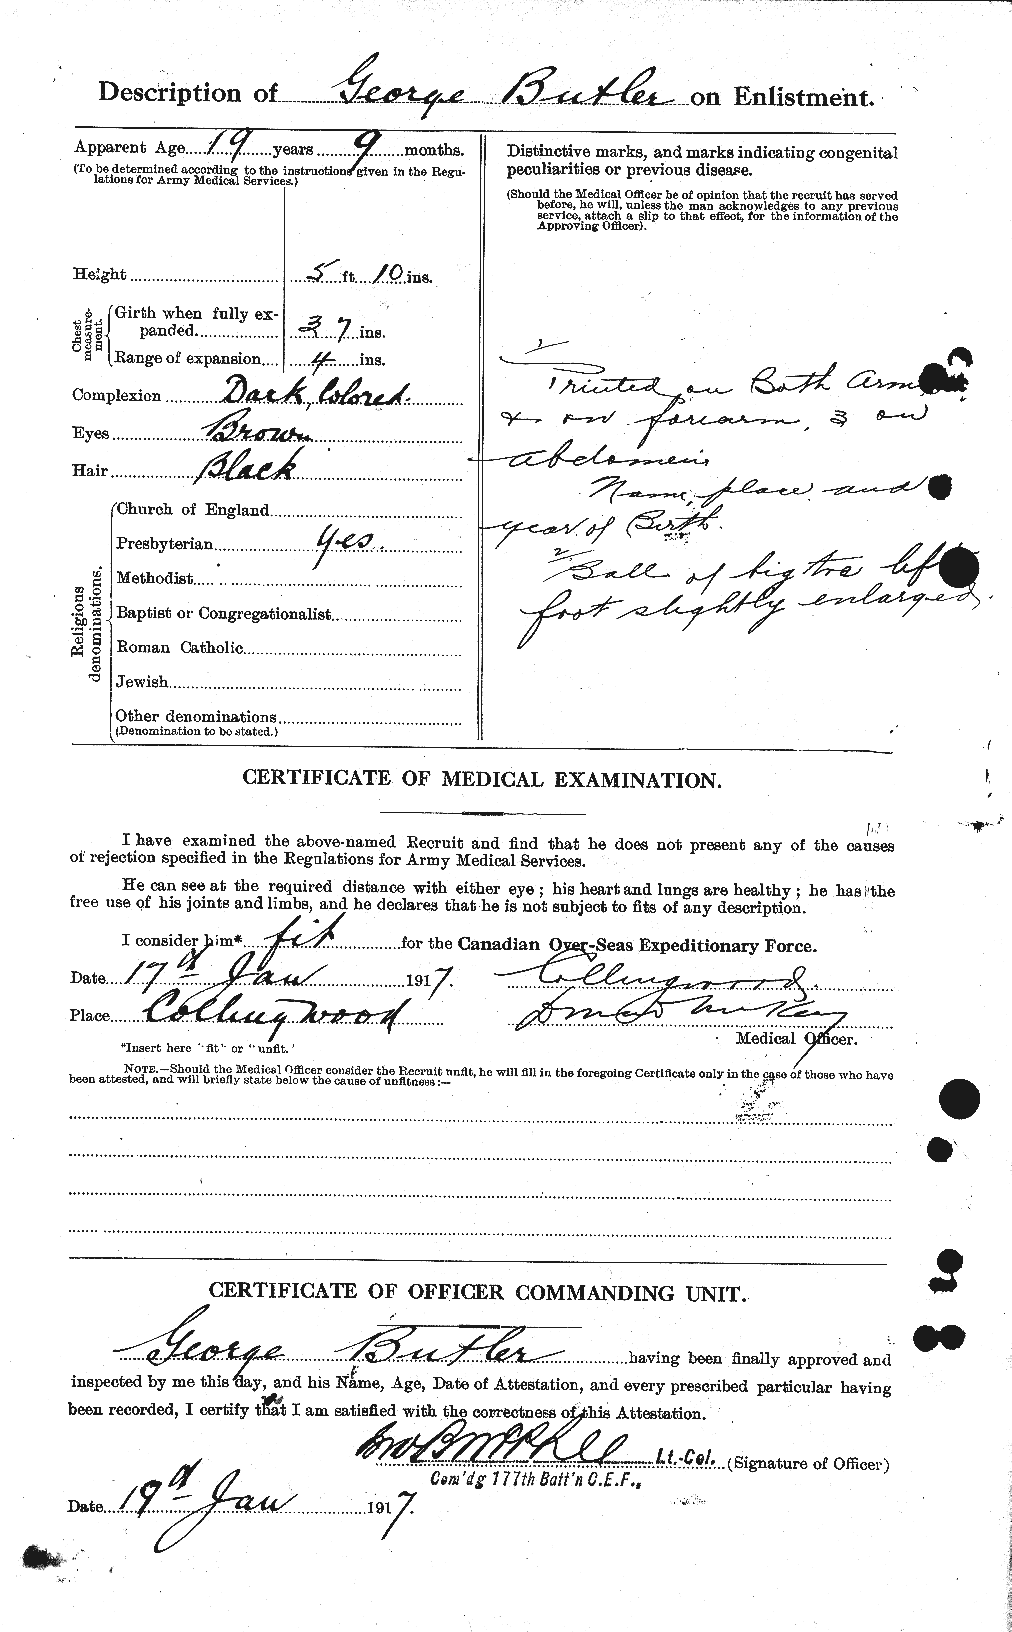 Personnel Records of the First World War - CEF 275921b